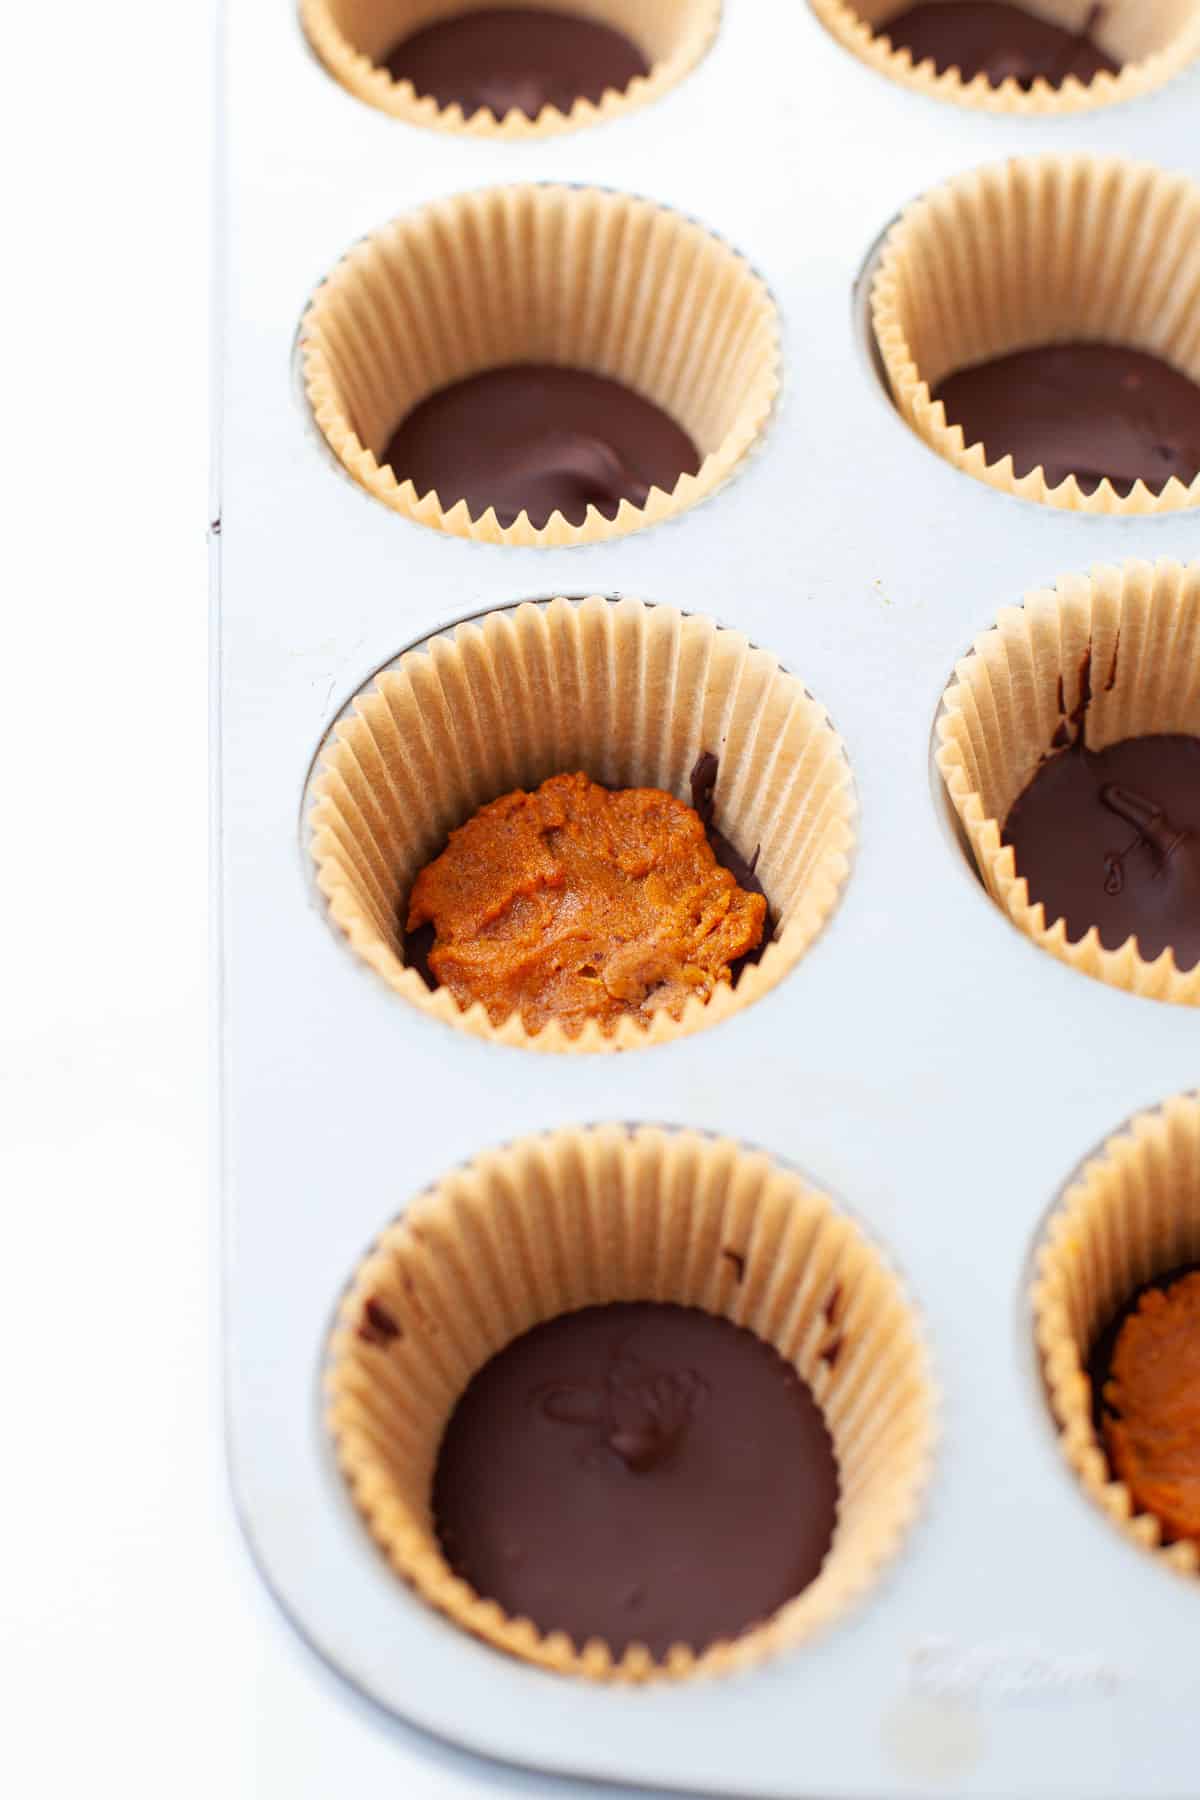 scoop of almond butter placed on top of dark chocolate laying in bottom of cupcake wrapper